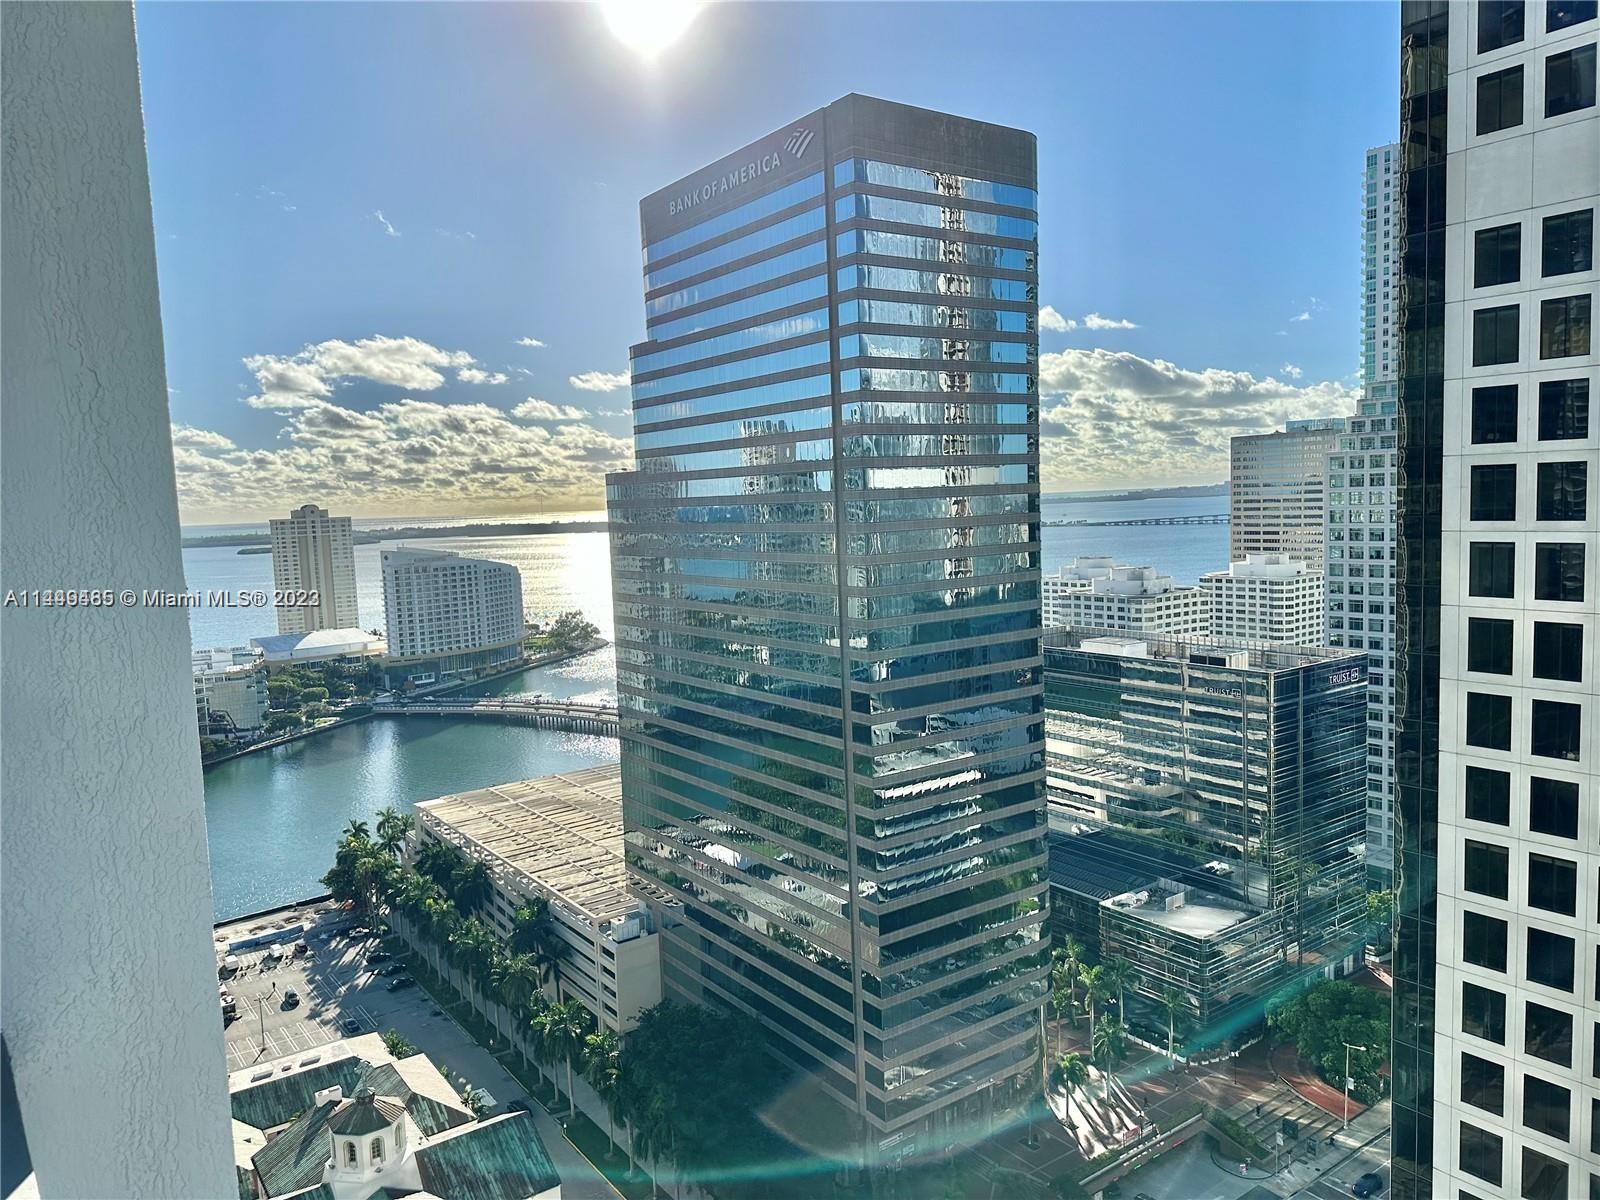 Spectacular Bay and Skyline views in the heart of Brickell. Close to downtown, major highways and in the center of Brickell, this spacious 1 bedroom/1 bathroom apartment features an open kitchen, top of the line stainless steel appliances, a storage unit, washer and dryer inside the unit, much natural light and much more. The unit is located at 500 Brickell, a well-kept condominium with all amenities.